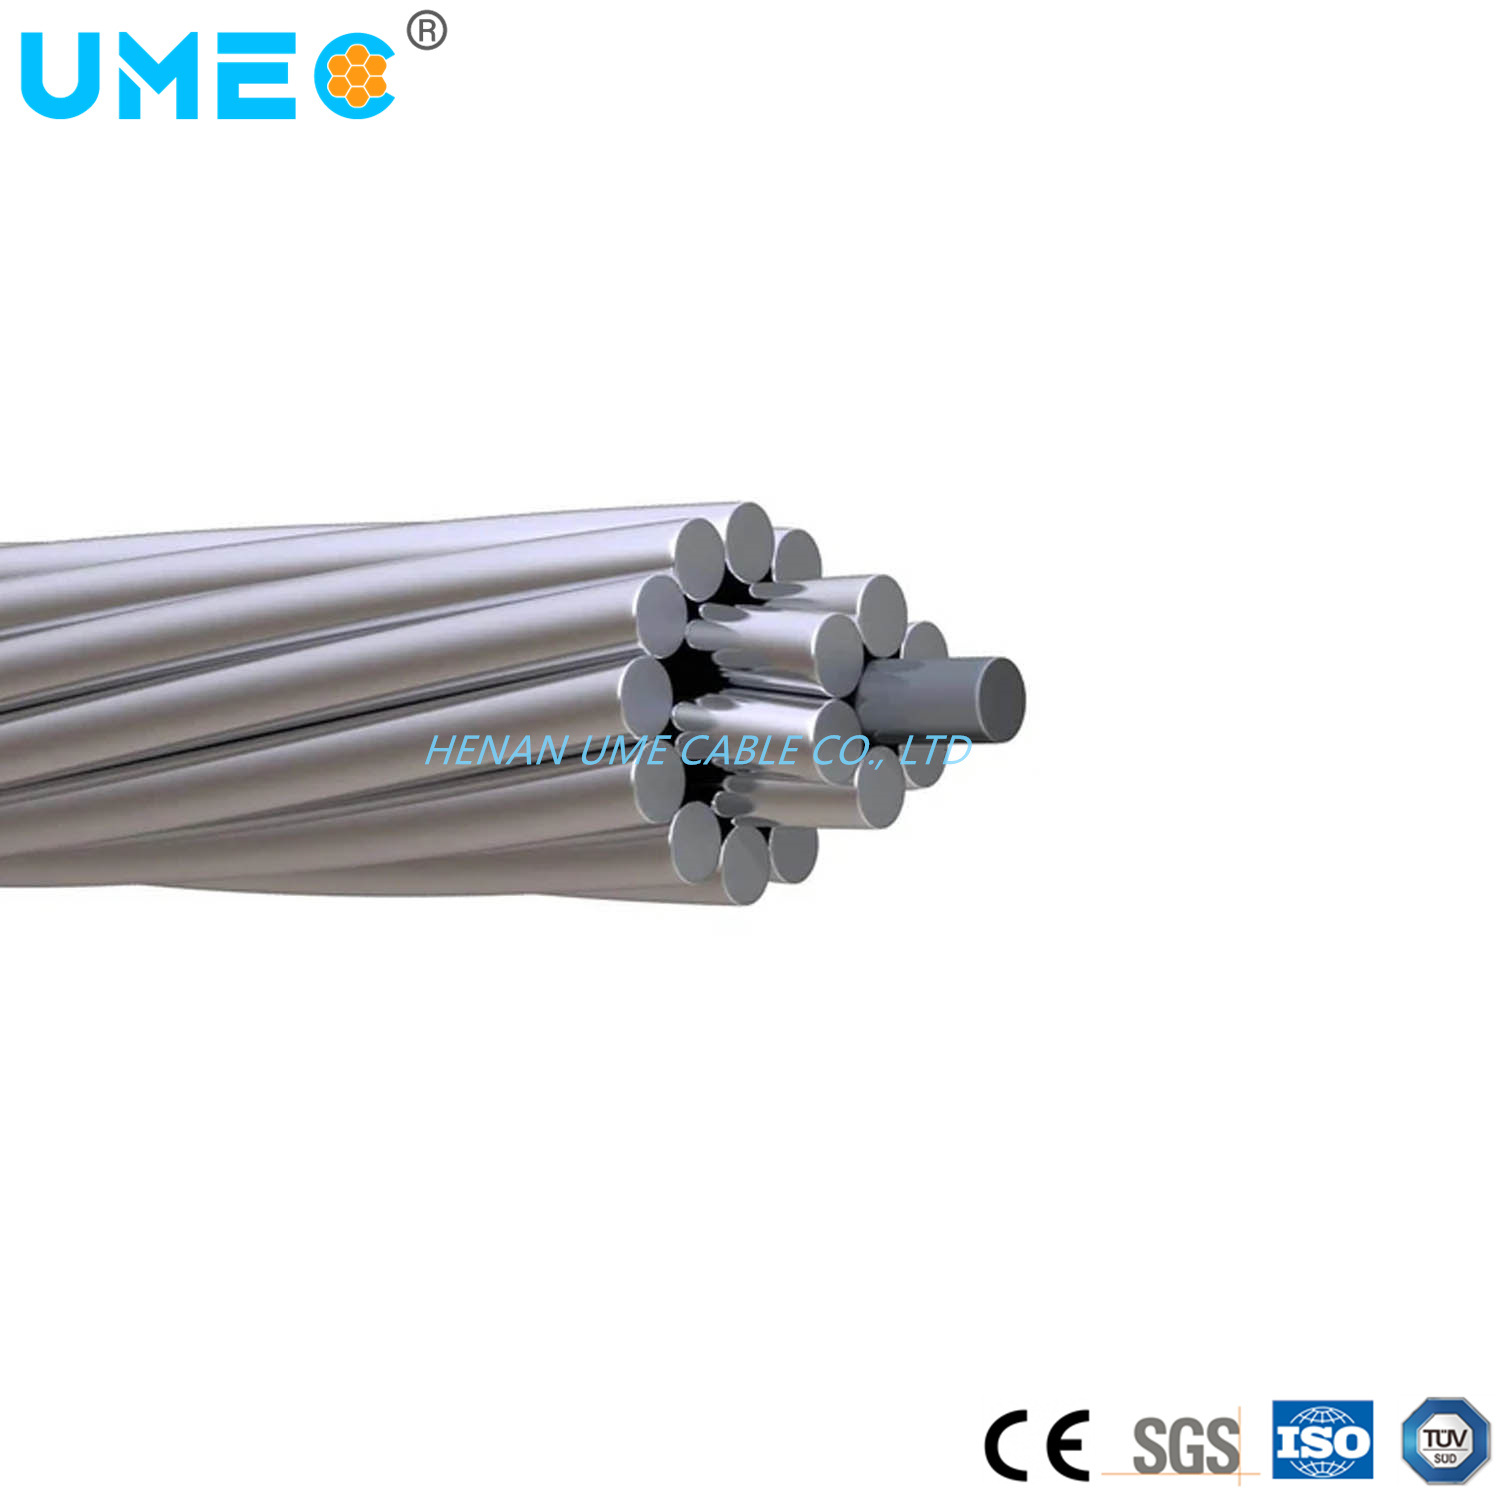 Aluminum Conductor Steel Reinforced Overhead Cables ACSR Conductor